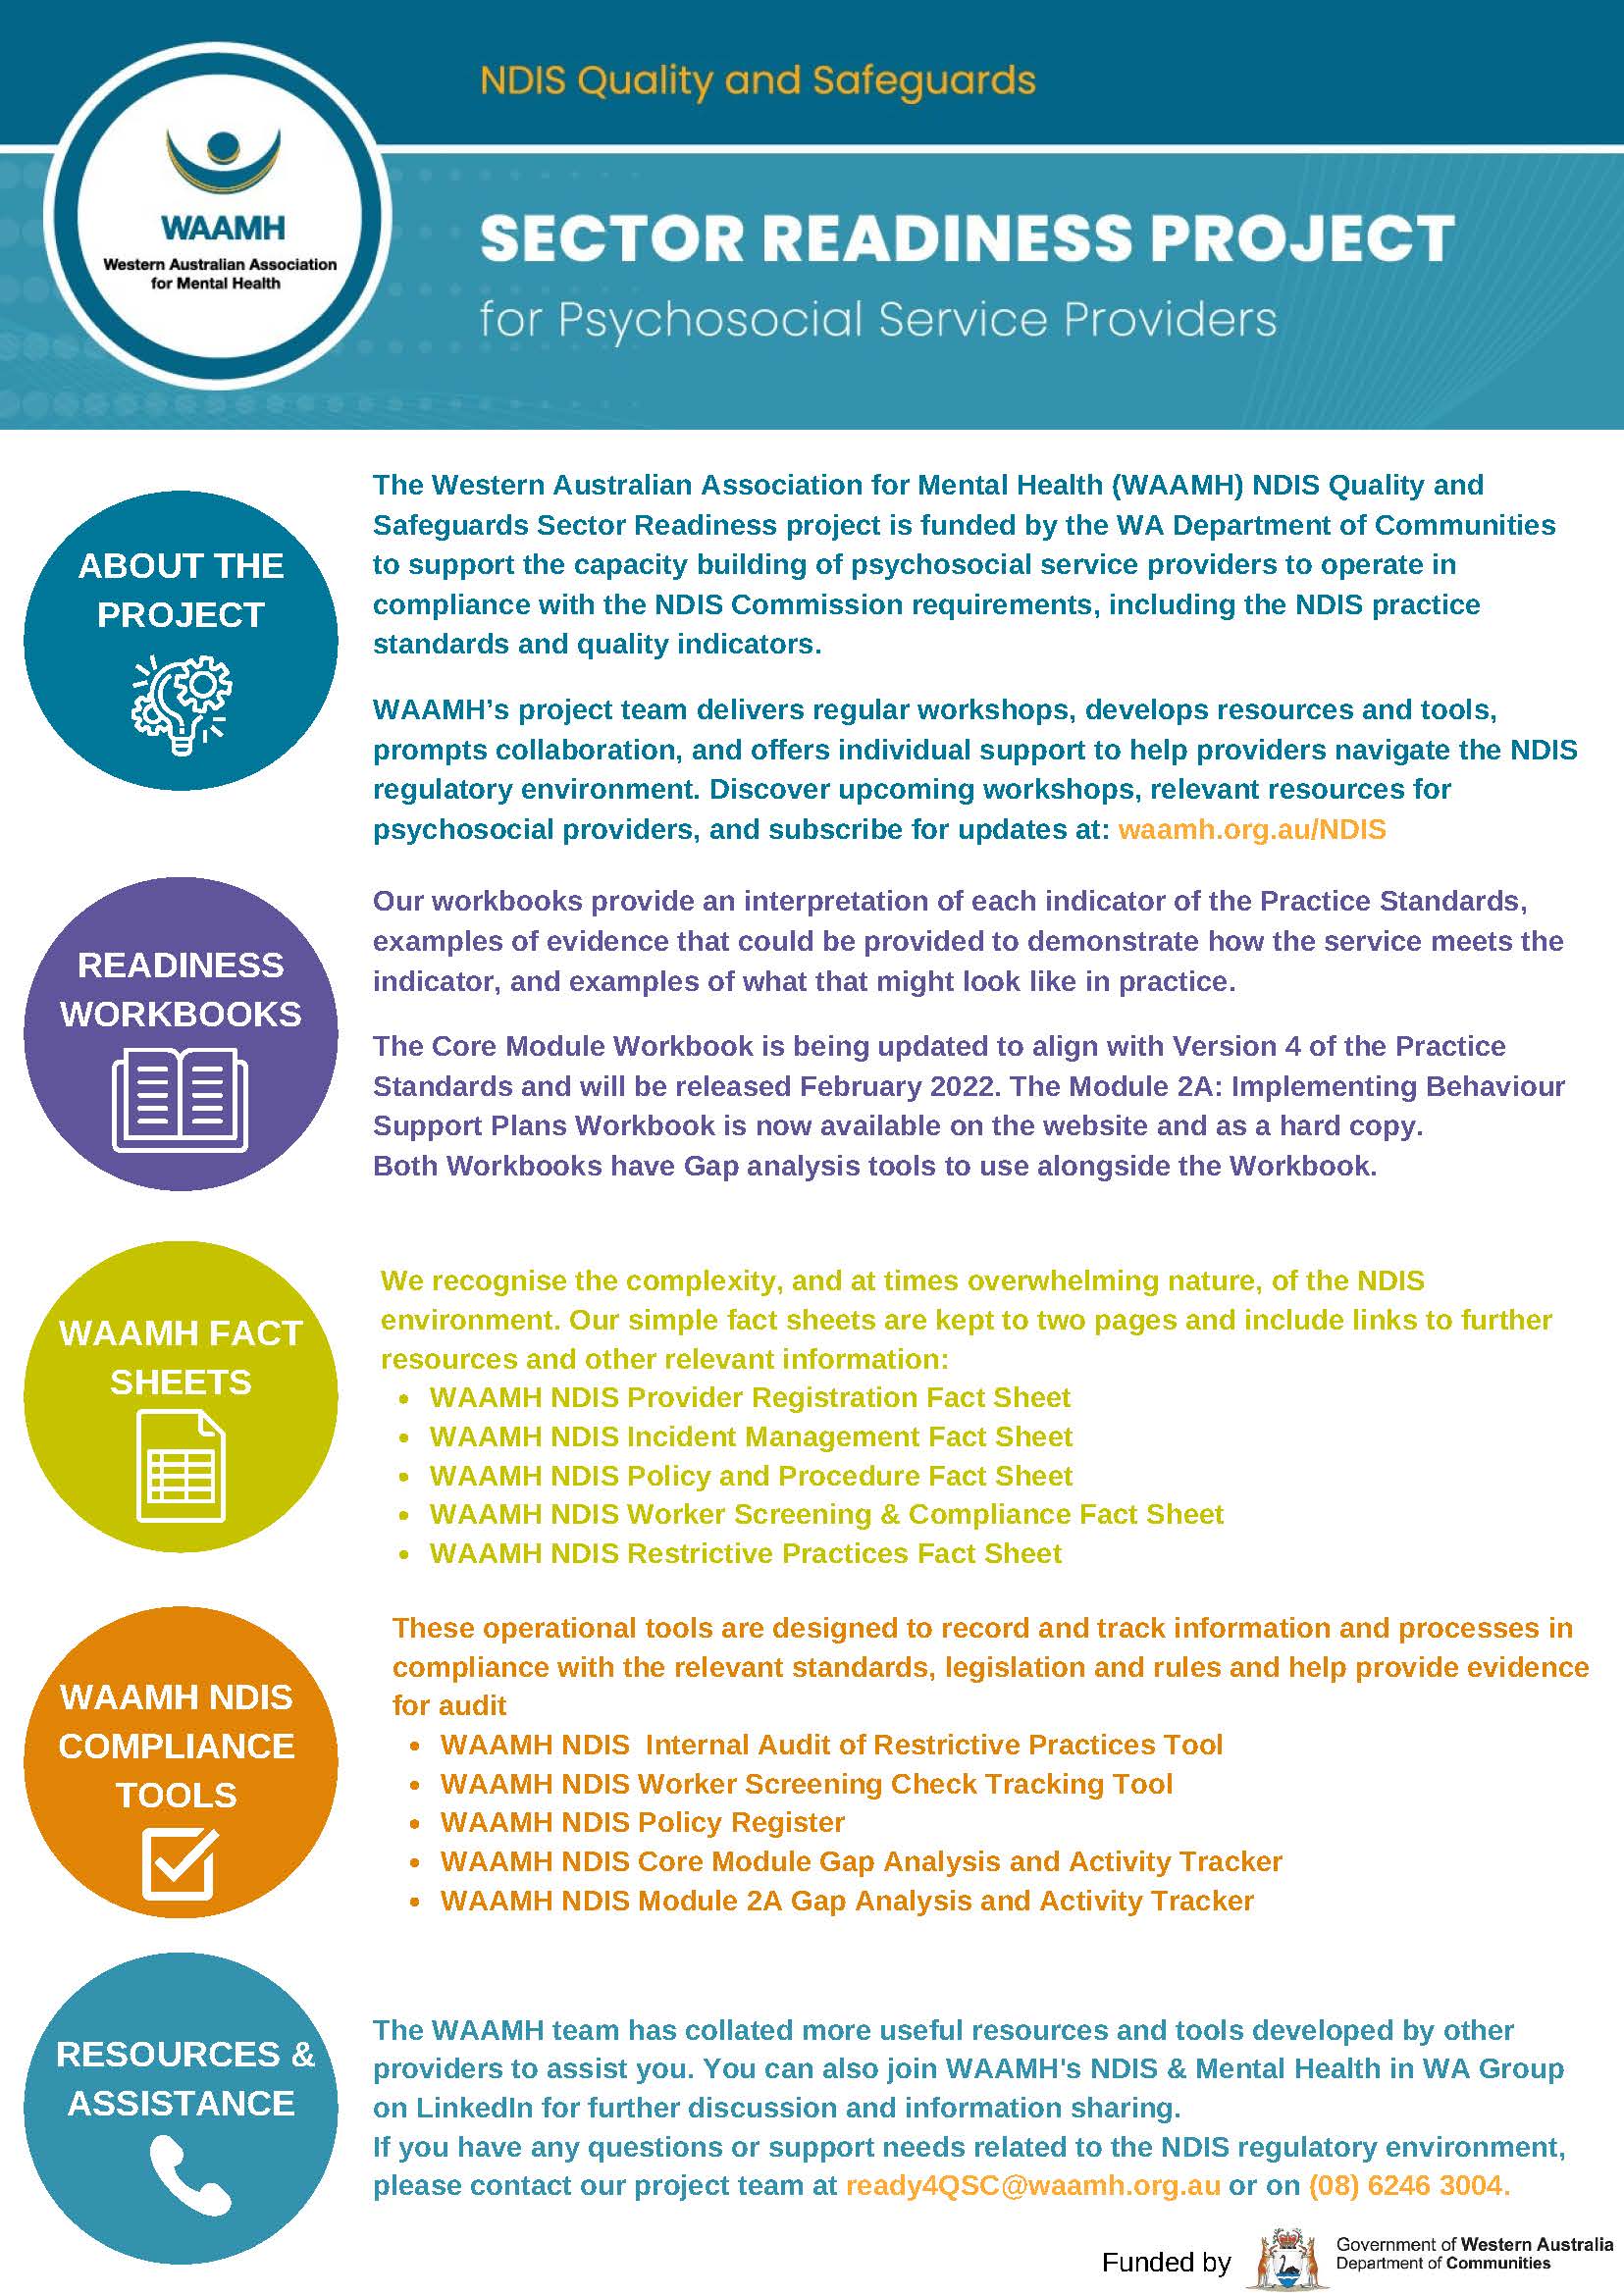 WAAMH NDIS Sector Readiness Project factsheet